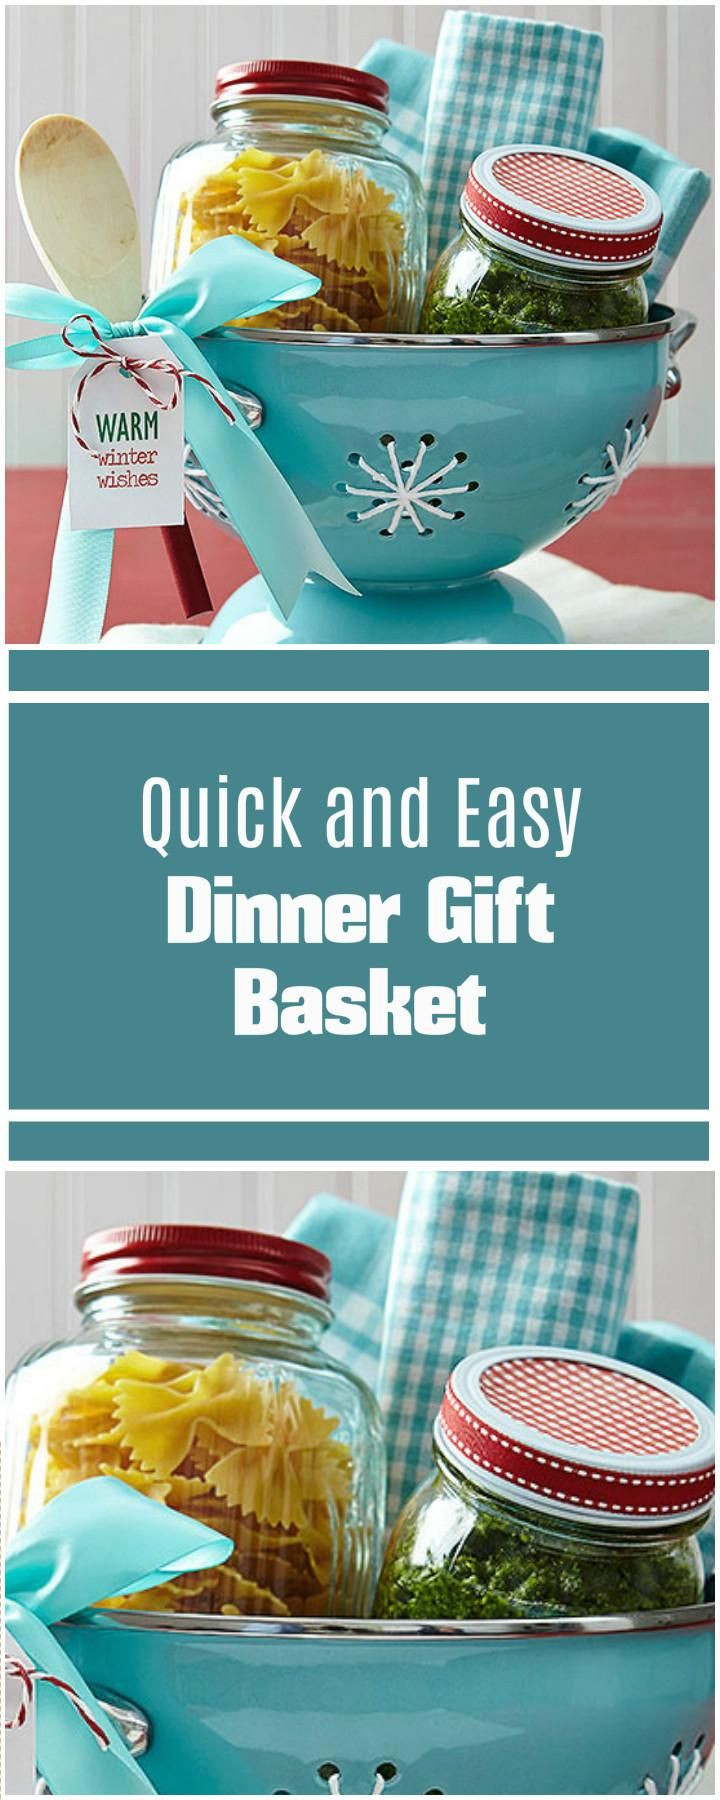 Food Gift Basket Ideas Diy
 70 Unique Gift Basket Ideas You Can Make At Home